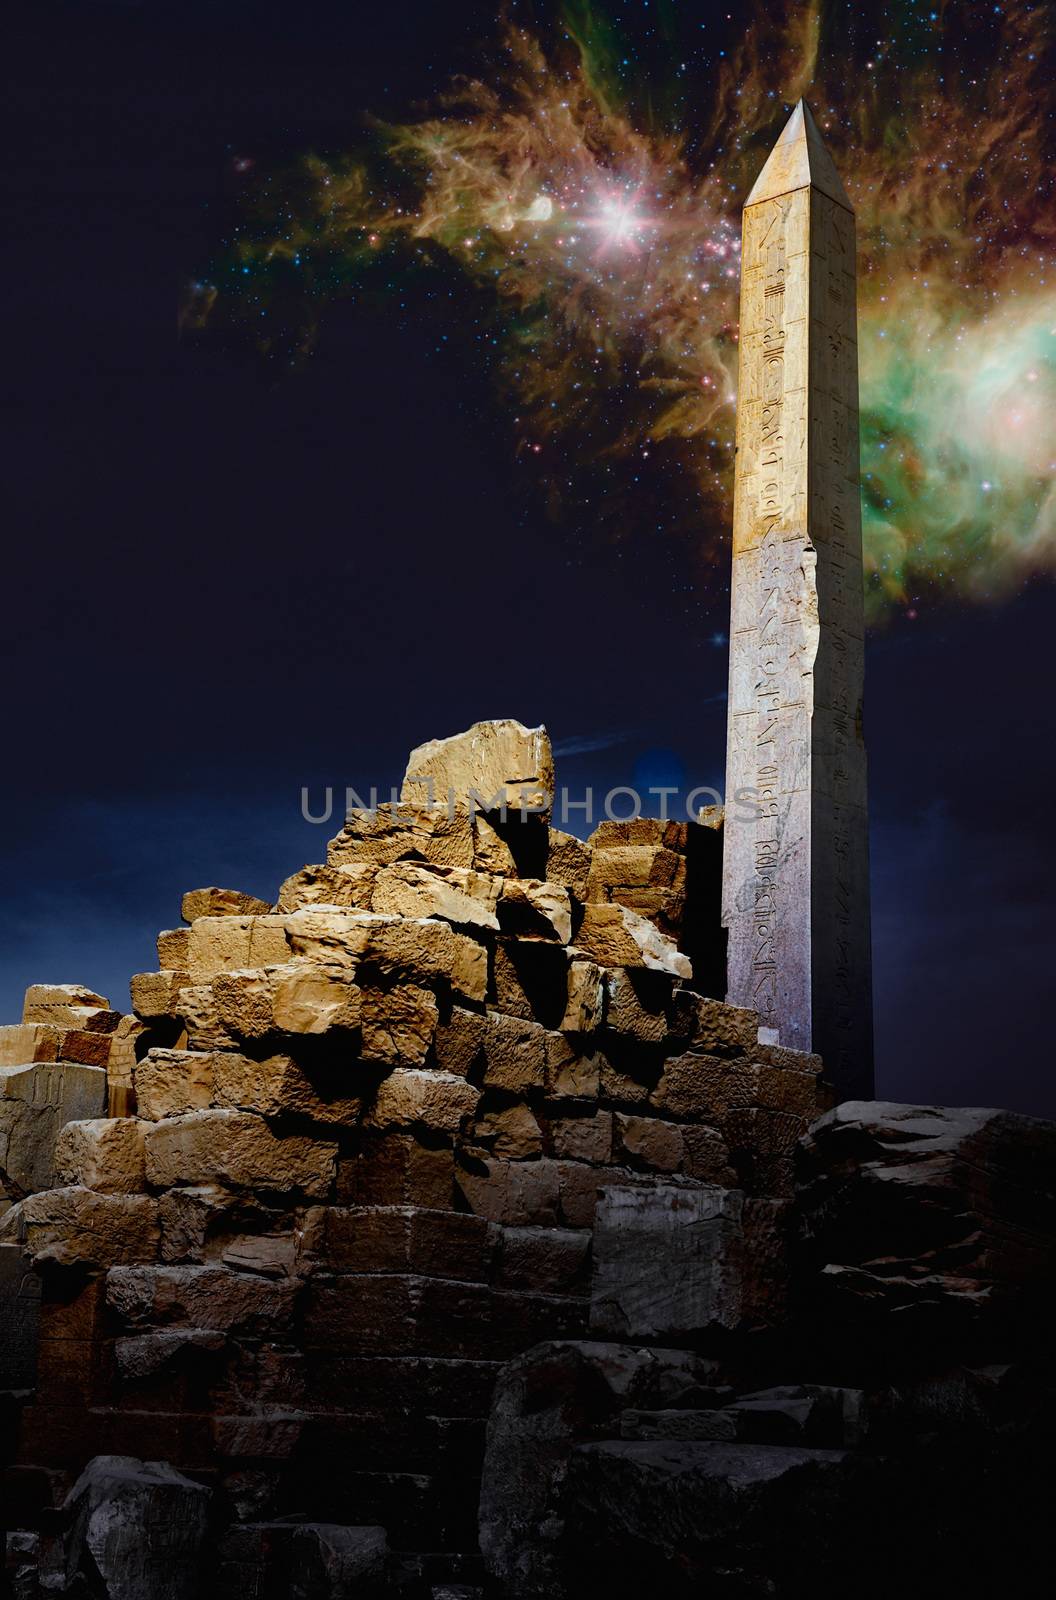 Magic night in Luxor, Egypt. This image is good for mystery, esoteric, sci-fi, strange, new-age, astrology